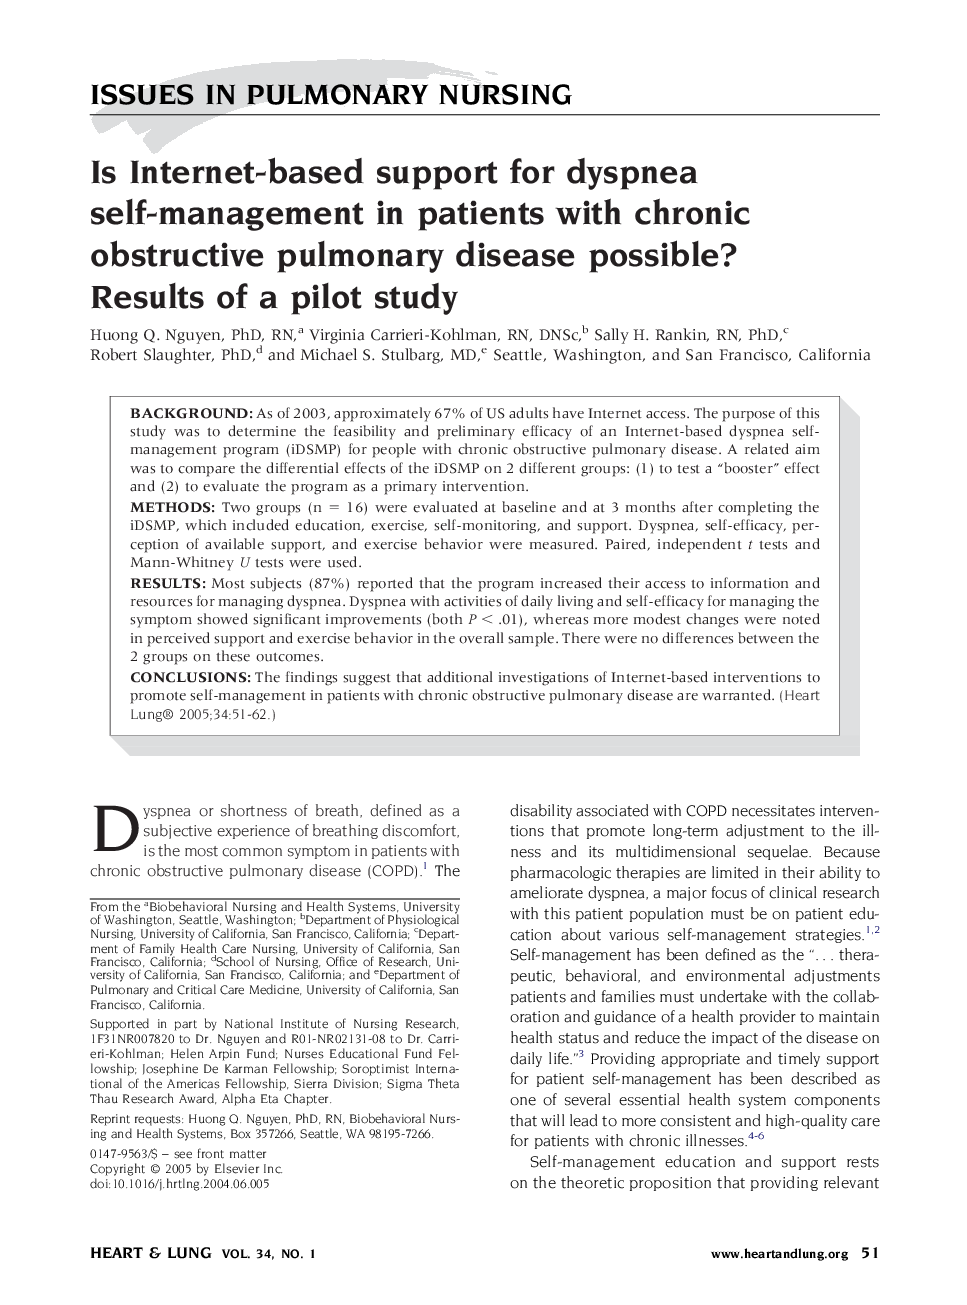 Is Internet-based support for dyspnea self-management in patients with chronic obstructive pulmonary disease possible? Results of a pilot study